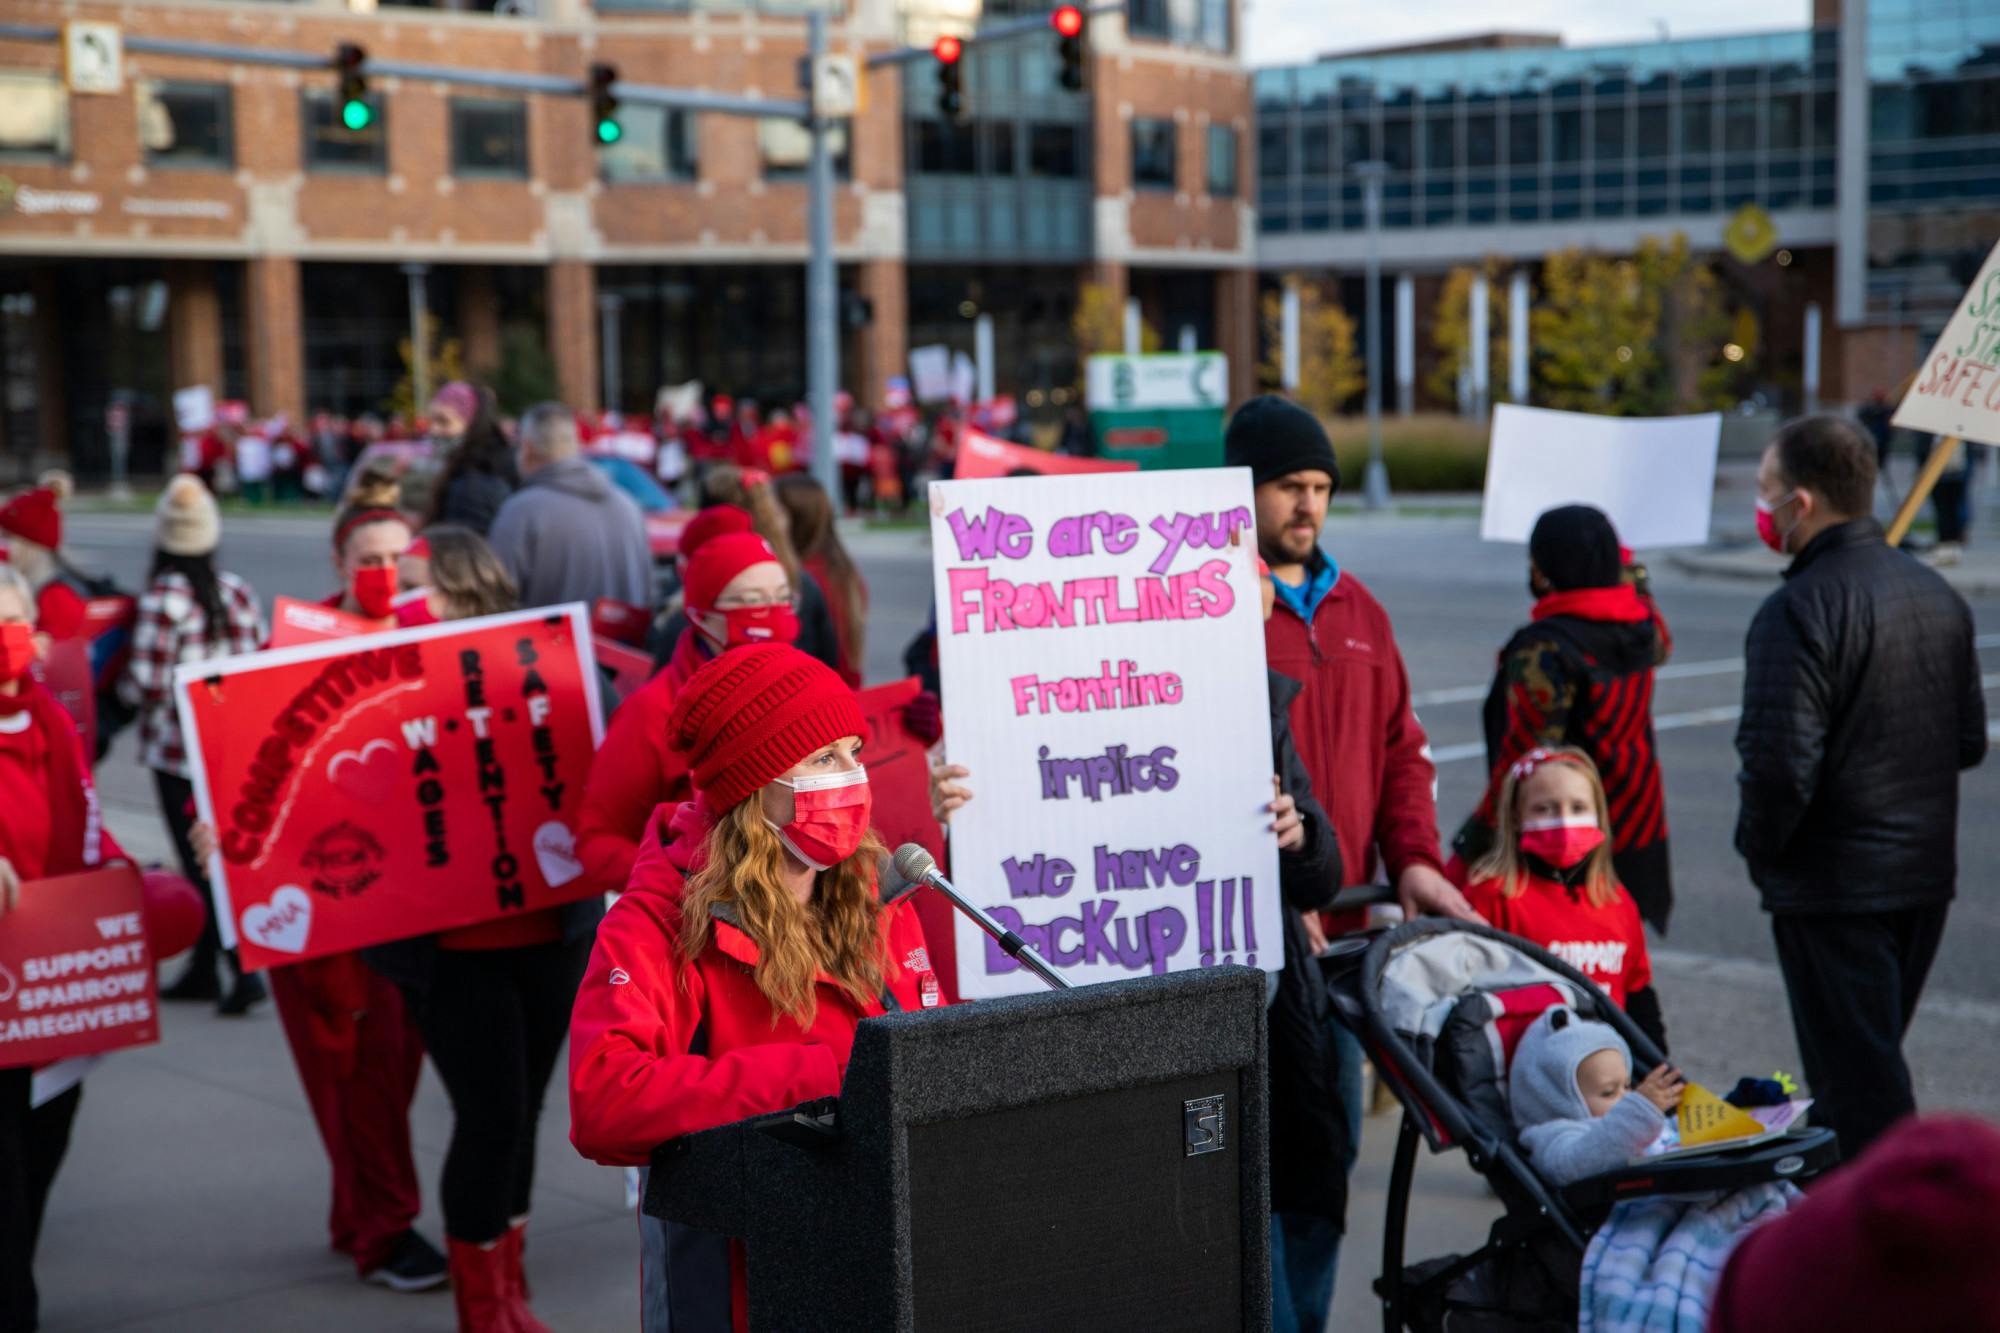 <p>Sparrow nurses along with supporters of them picket along Michigan Avenue in Lansing on Nov. 3, 2021. The picket was organized by the Professional Employees Council of Sparrow Hospital-Michigan Nurses Association, and shown is PECSH President and Sparrow nurse, Katie Pontifex, speaking at the event. </p>